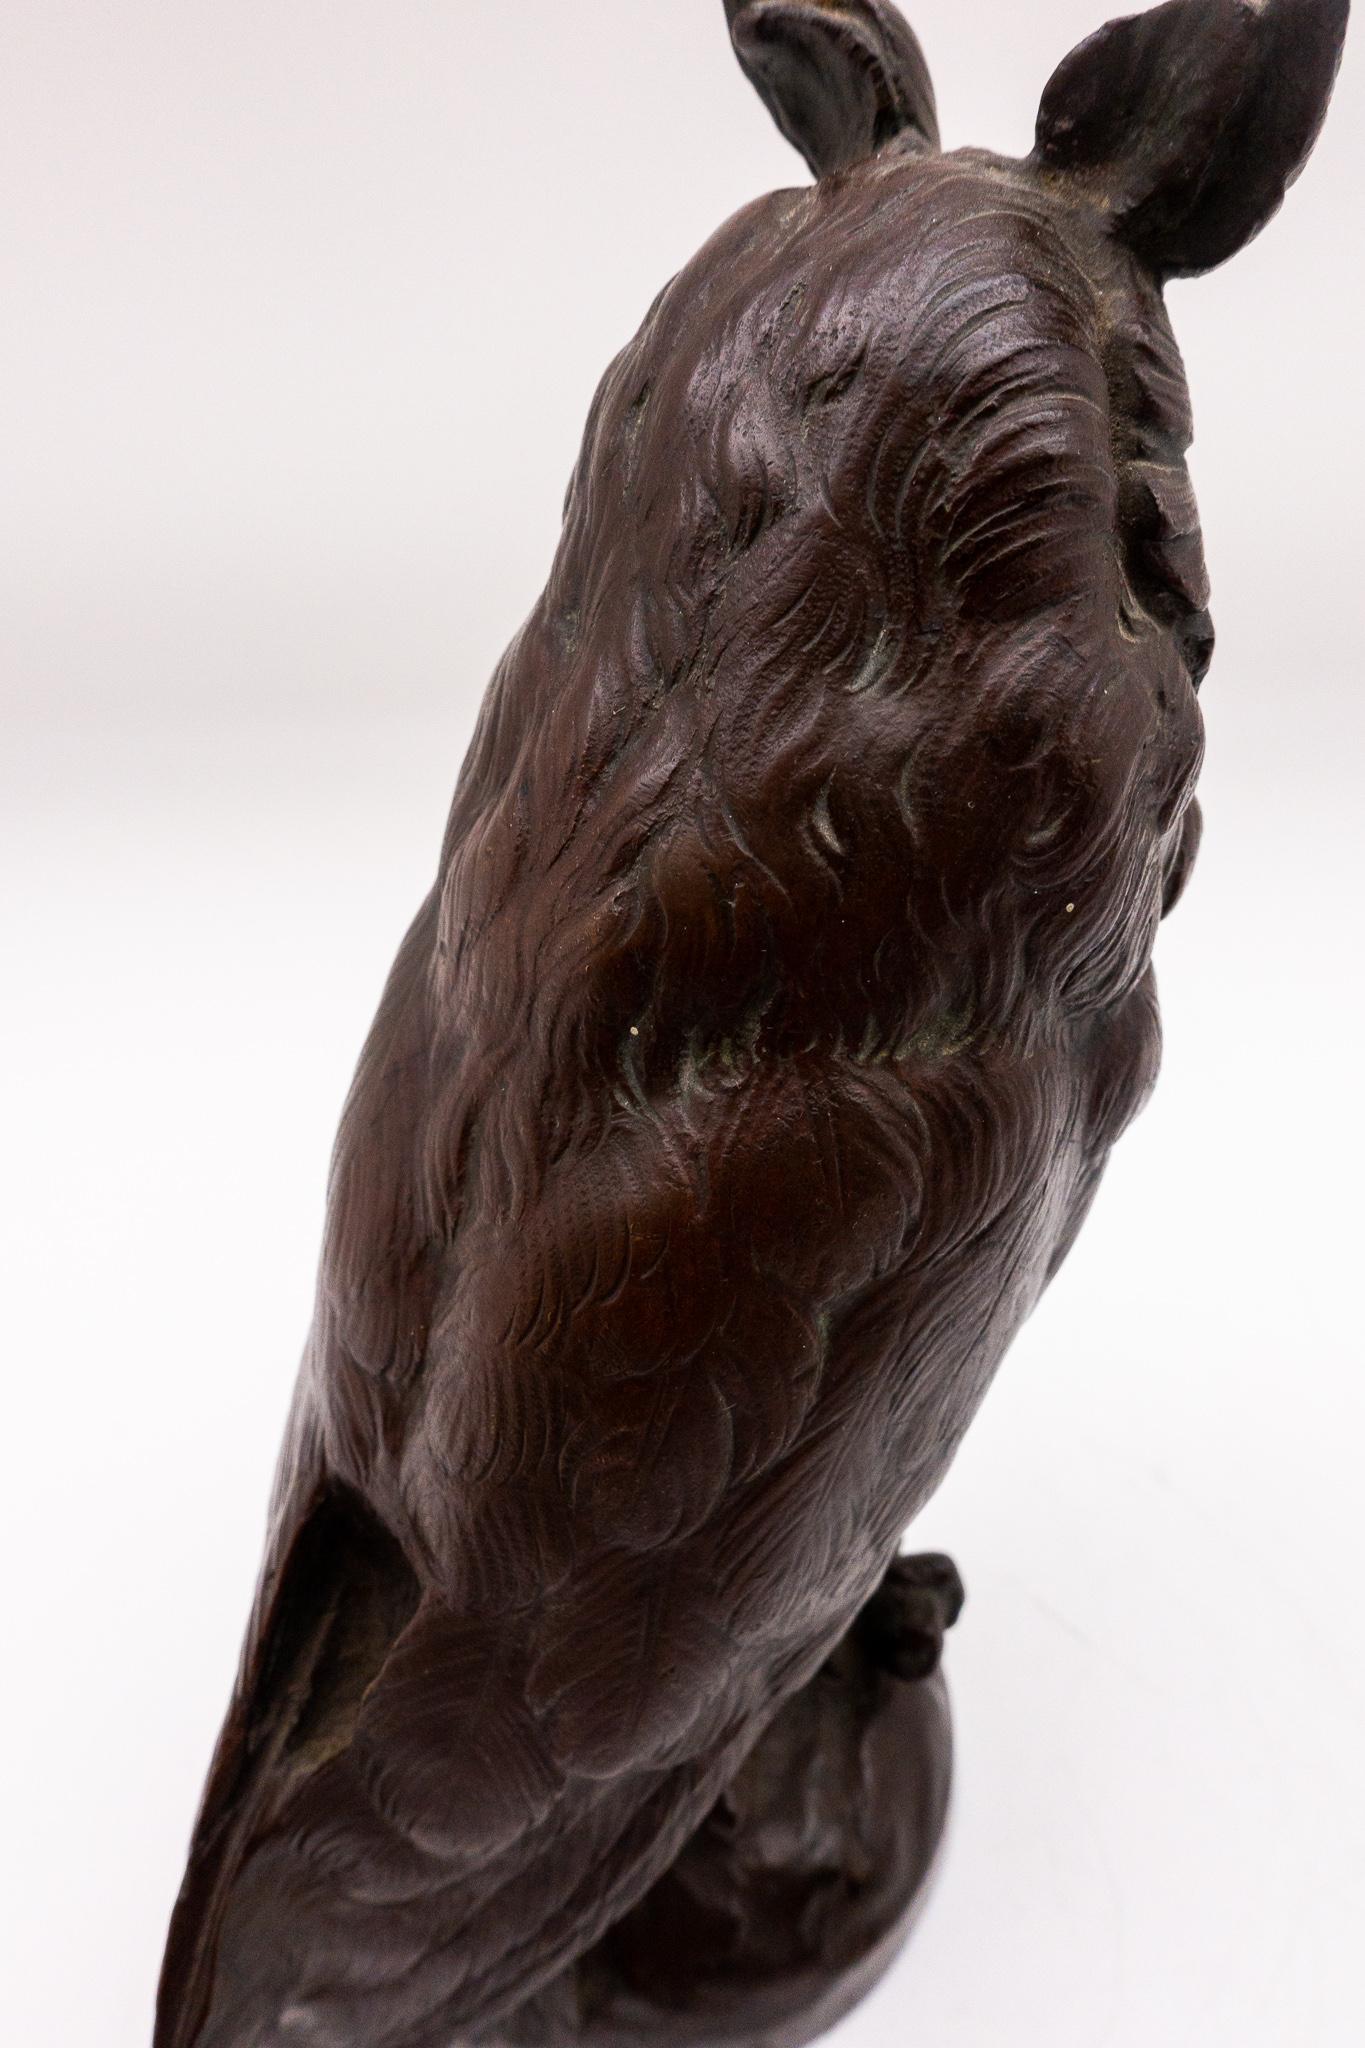 Bronze 19th Century Sculpture of Perched Owl, by L. Frouin 'Signed' 1